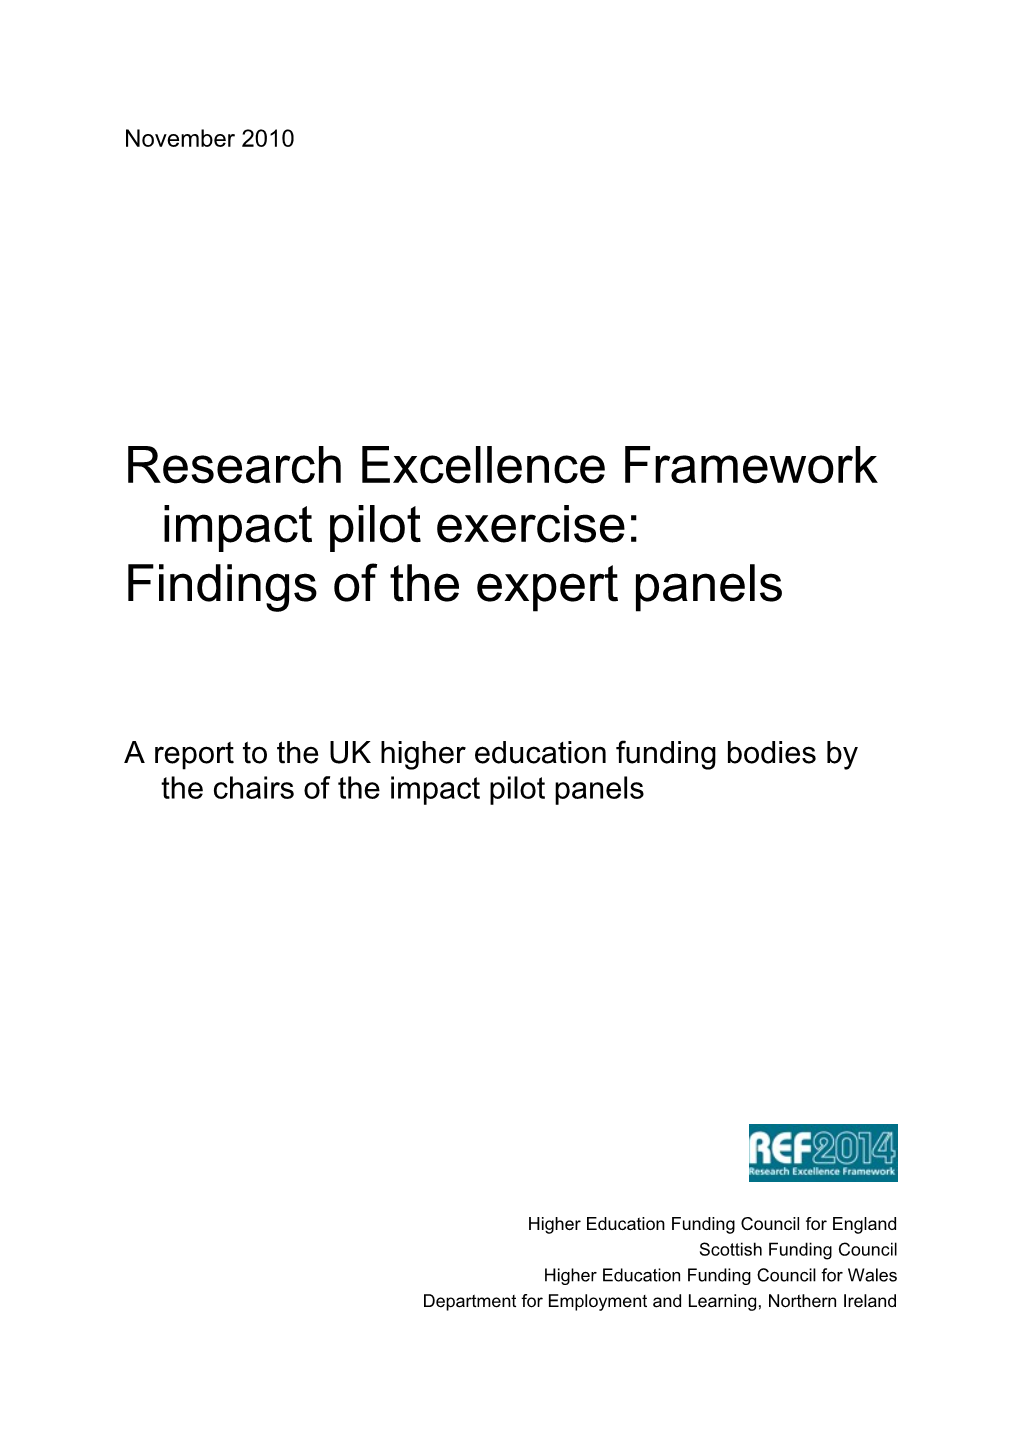 Research Excellence Framework Impact Pilot Exercise